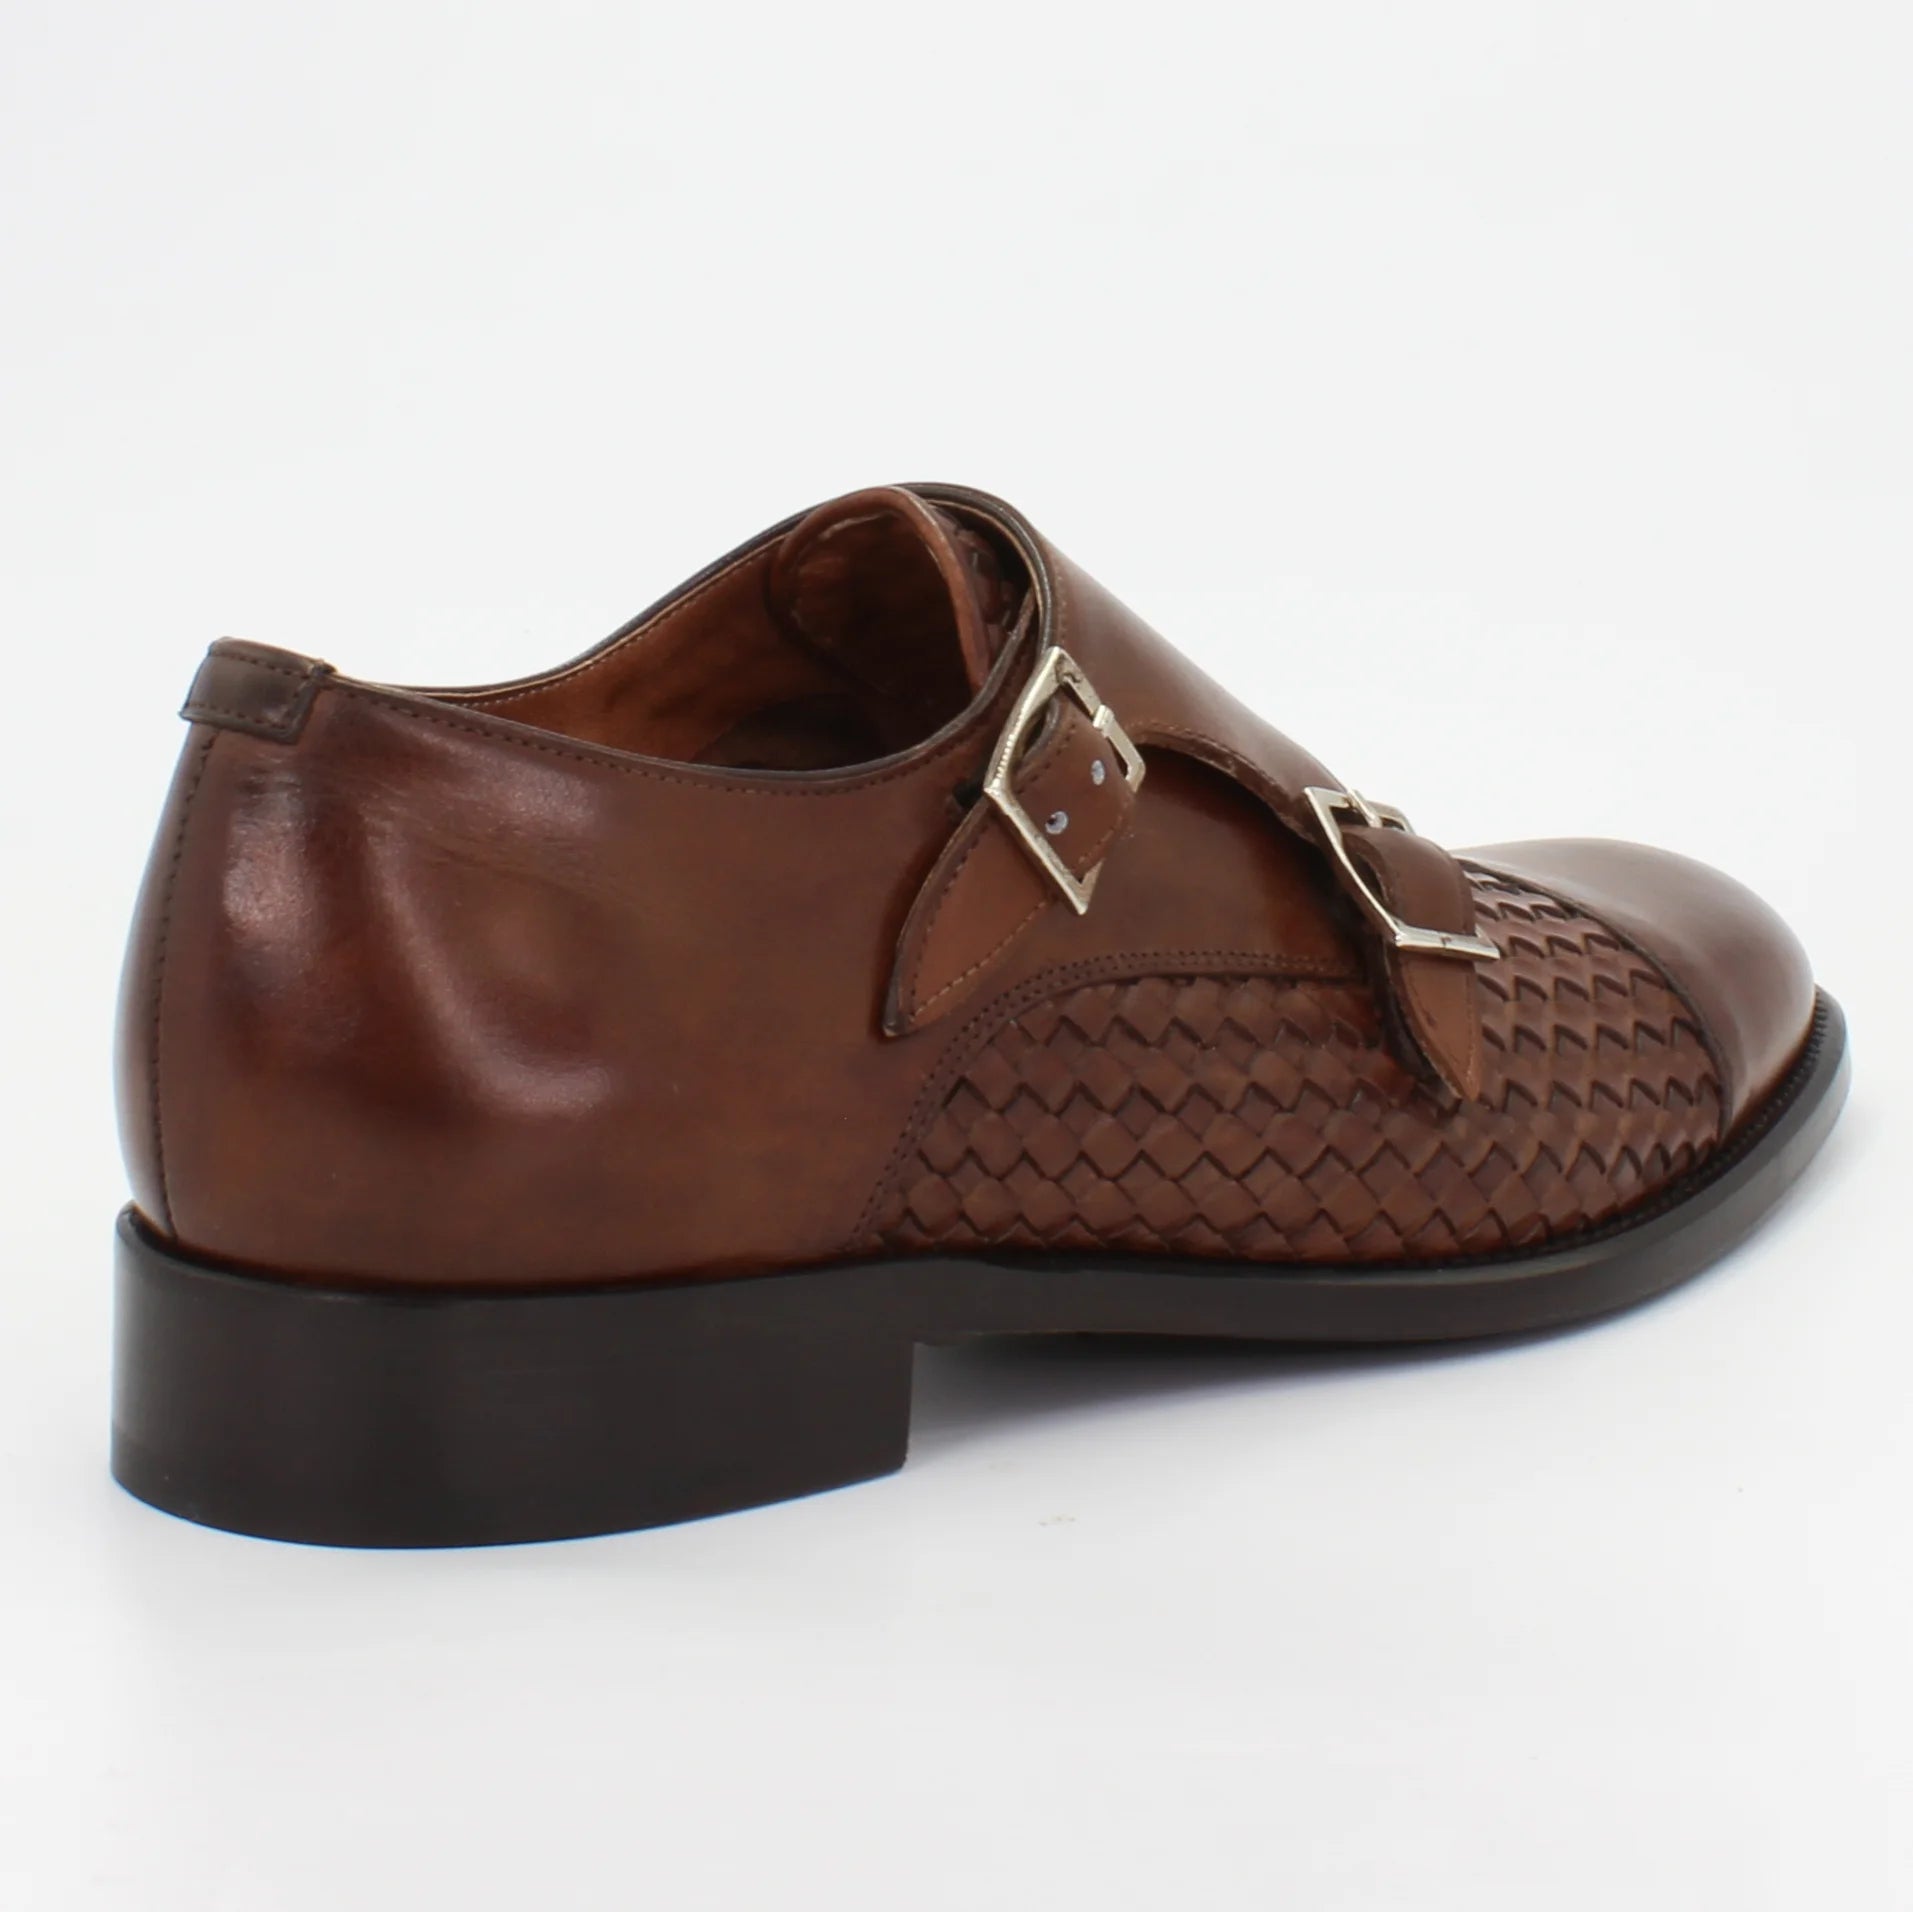 Shop Handmade Italian Leather woven monk strap in testa di moro (BRU11285) or browse our range of hand-made Italian shoes for men in leather or suede in-store at Aliverti Cape Town, or shop online. We deliver in South Africa & offer multiple payment plans as well as accept multiple safe & secure payment methods.